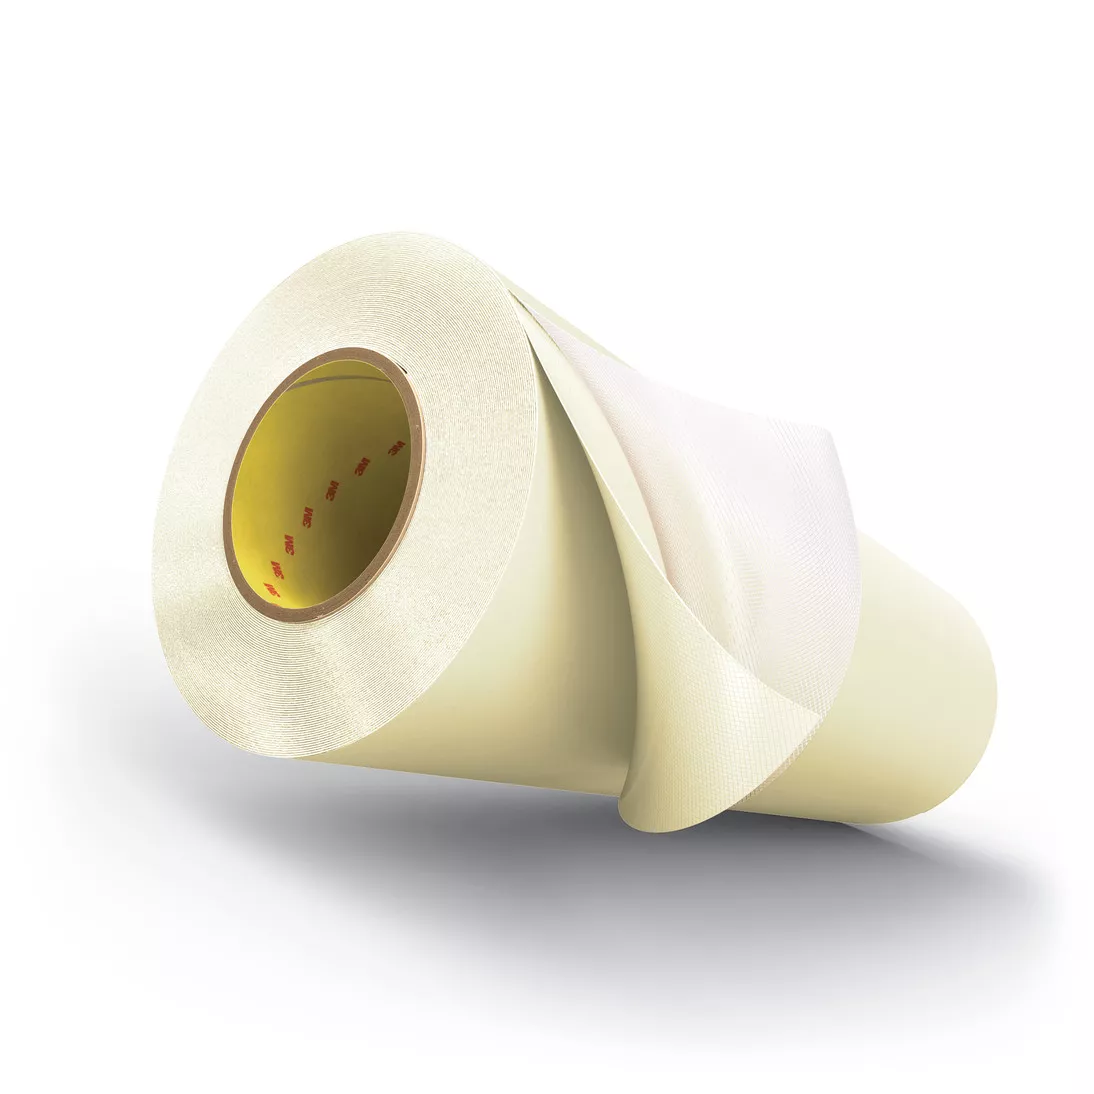 3M™ Cushion-Mount™ Plus Plate Mounting Tape E1015, White, 18 in x 25 yd,
15 mil, 1 roll per case